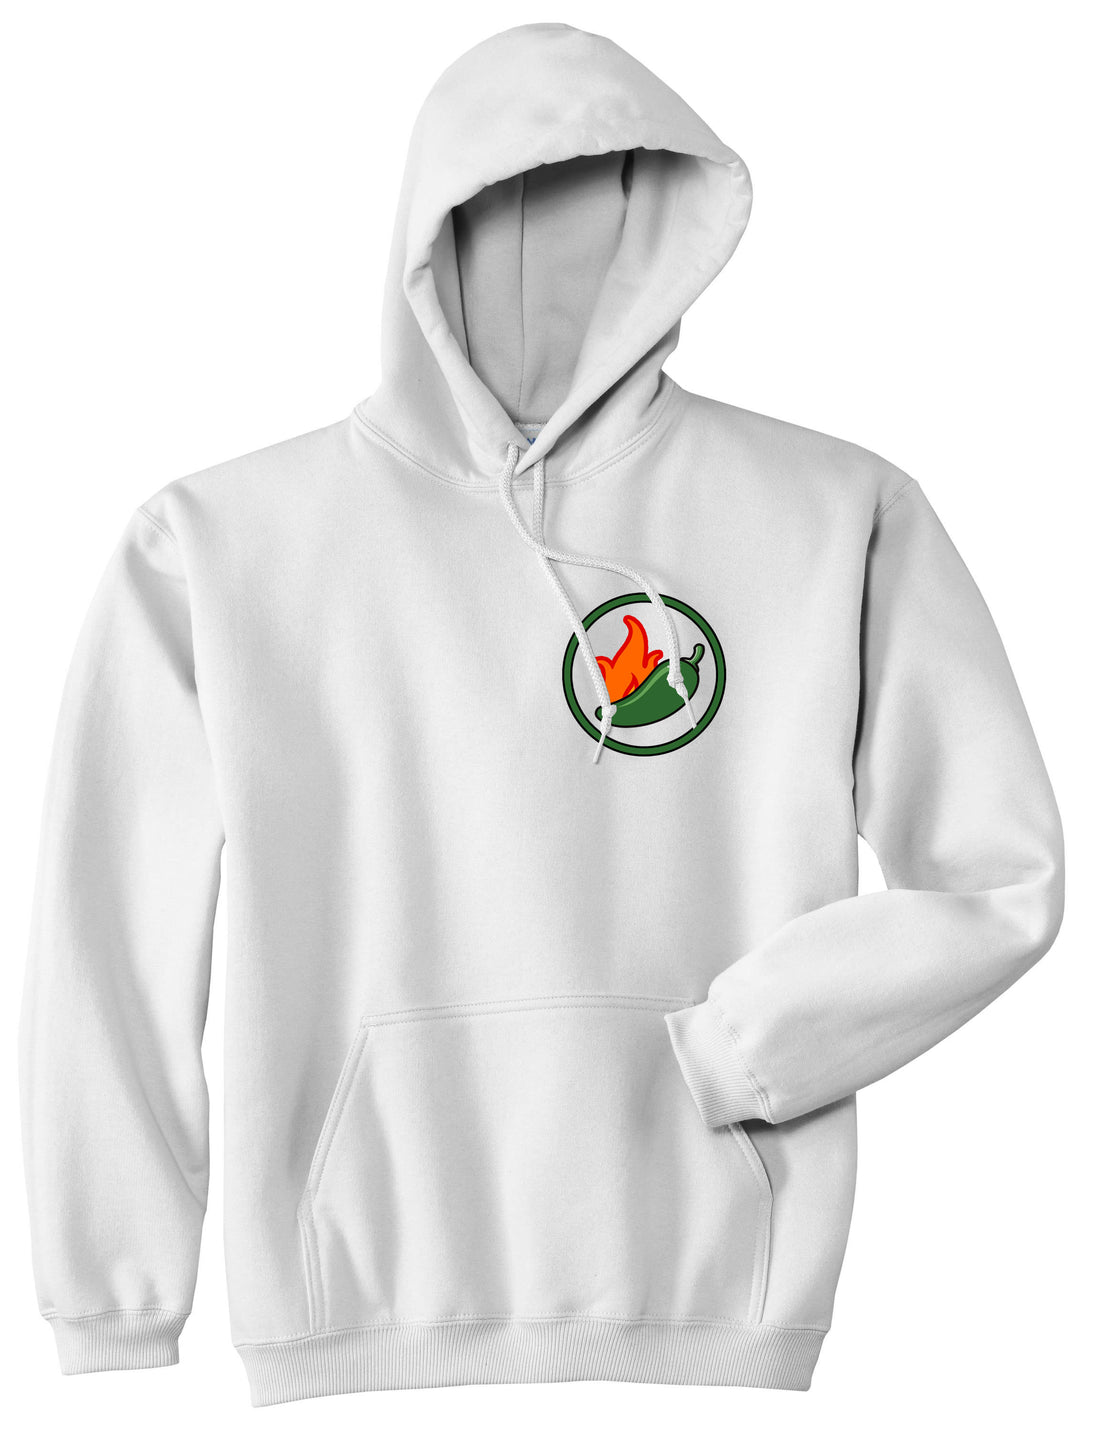 Jalapeno Hot Pepper Chest Mens Pullover Hoodie White